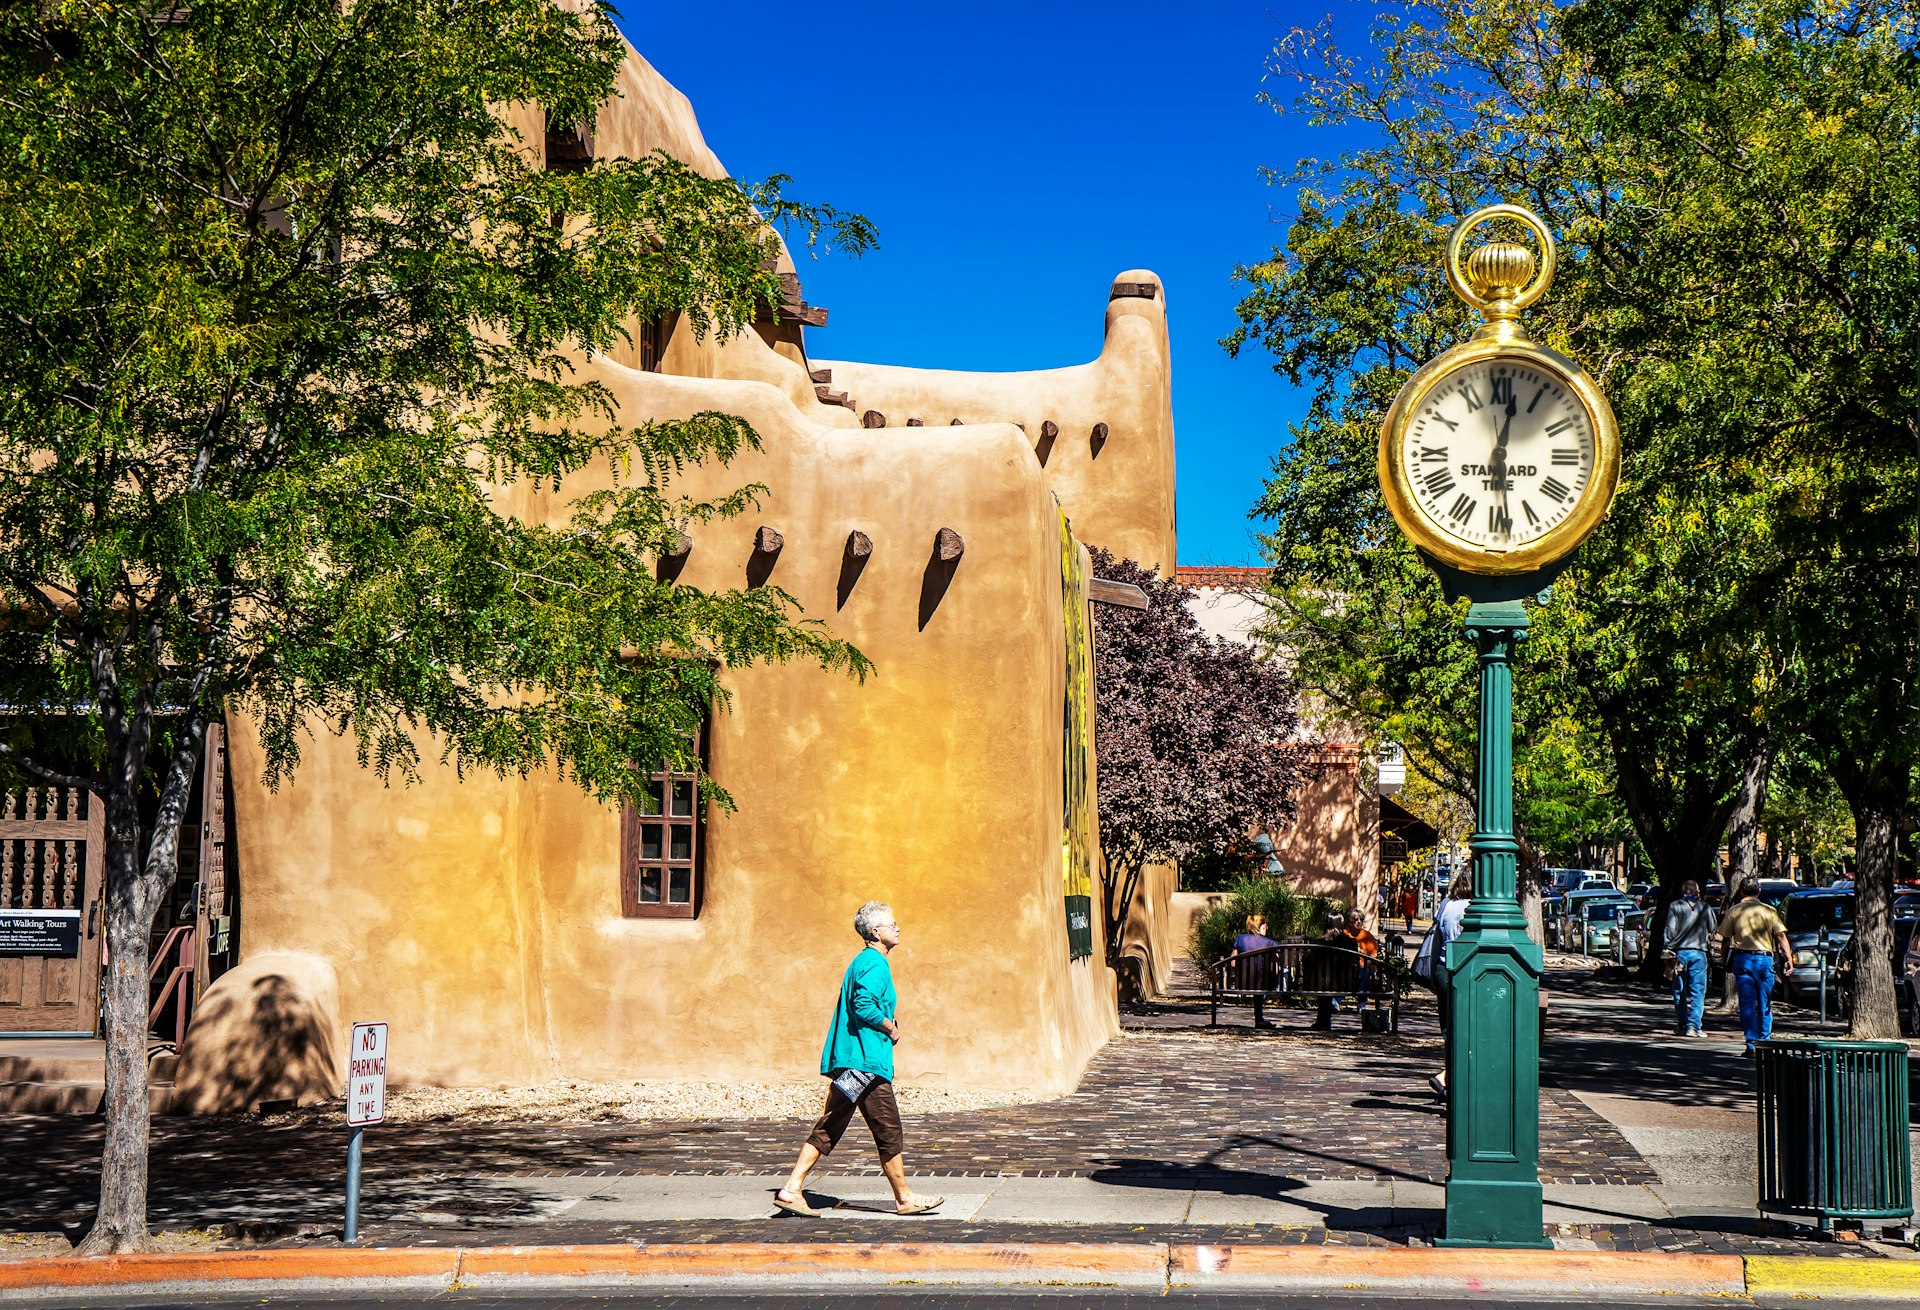 A woman walks by a tall clock on a street in a market in Santa Fe, New Mexico 